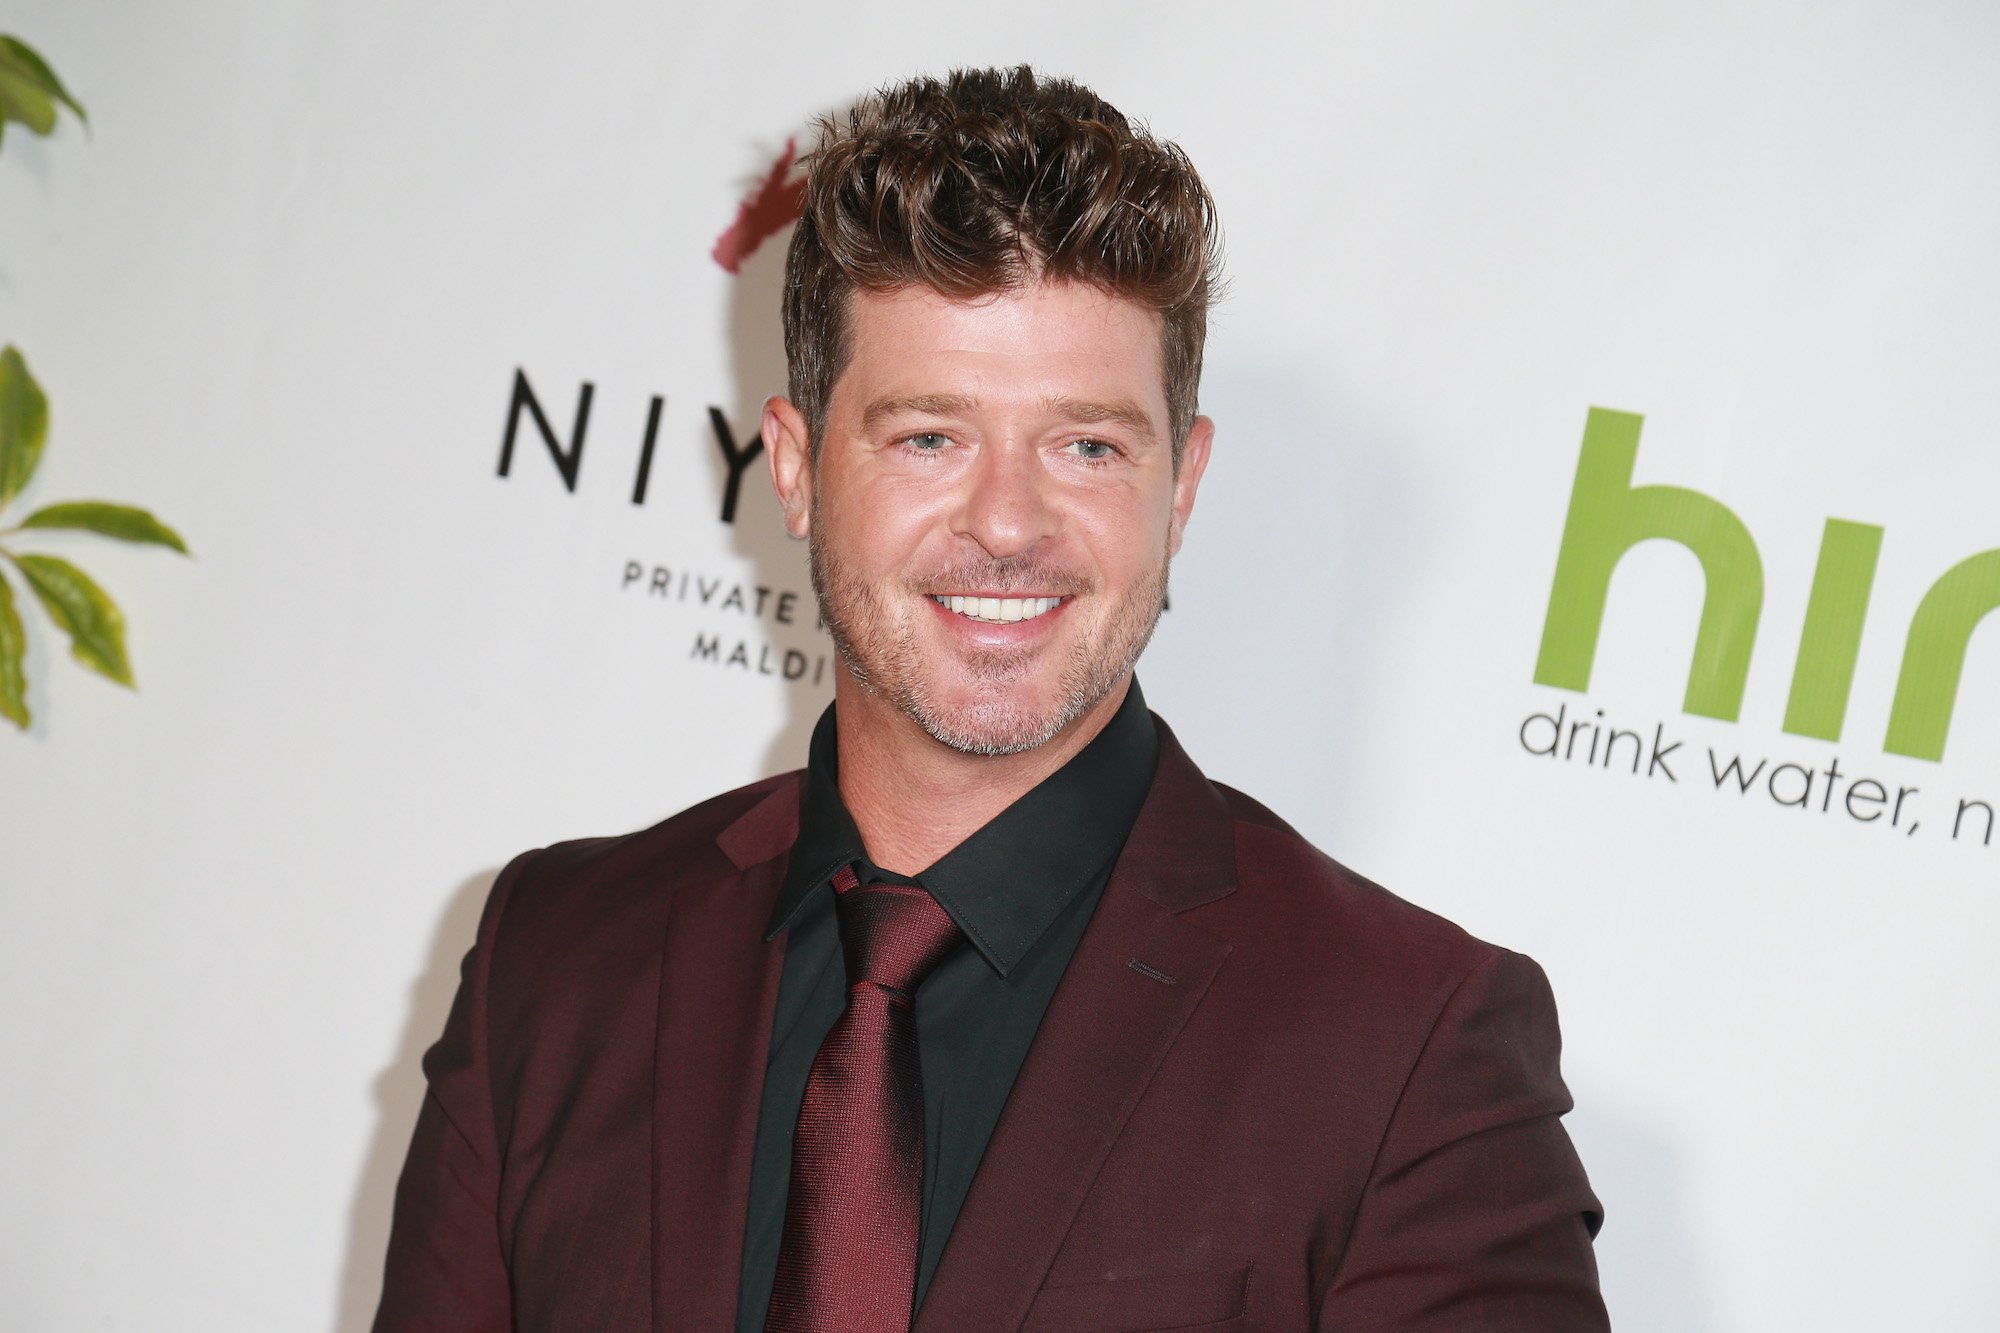 Robin Thicke smiling in front of a white background